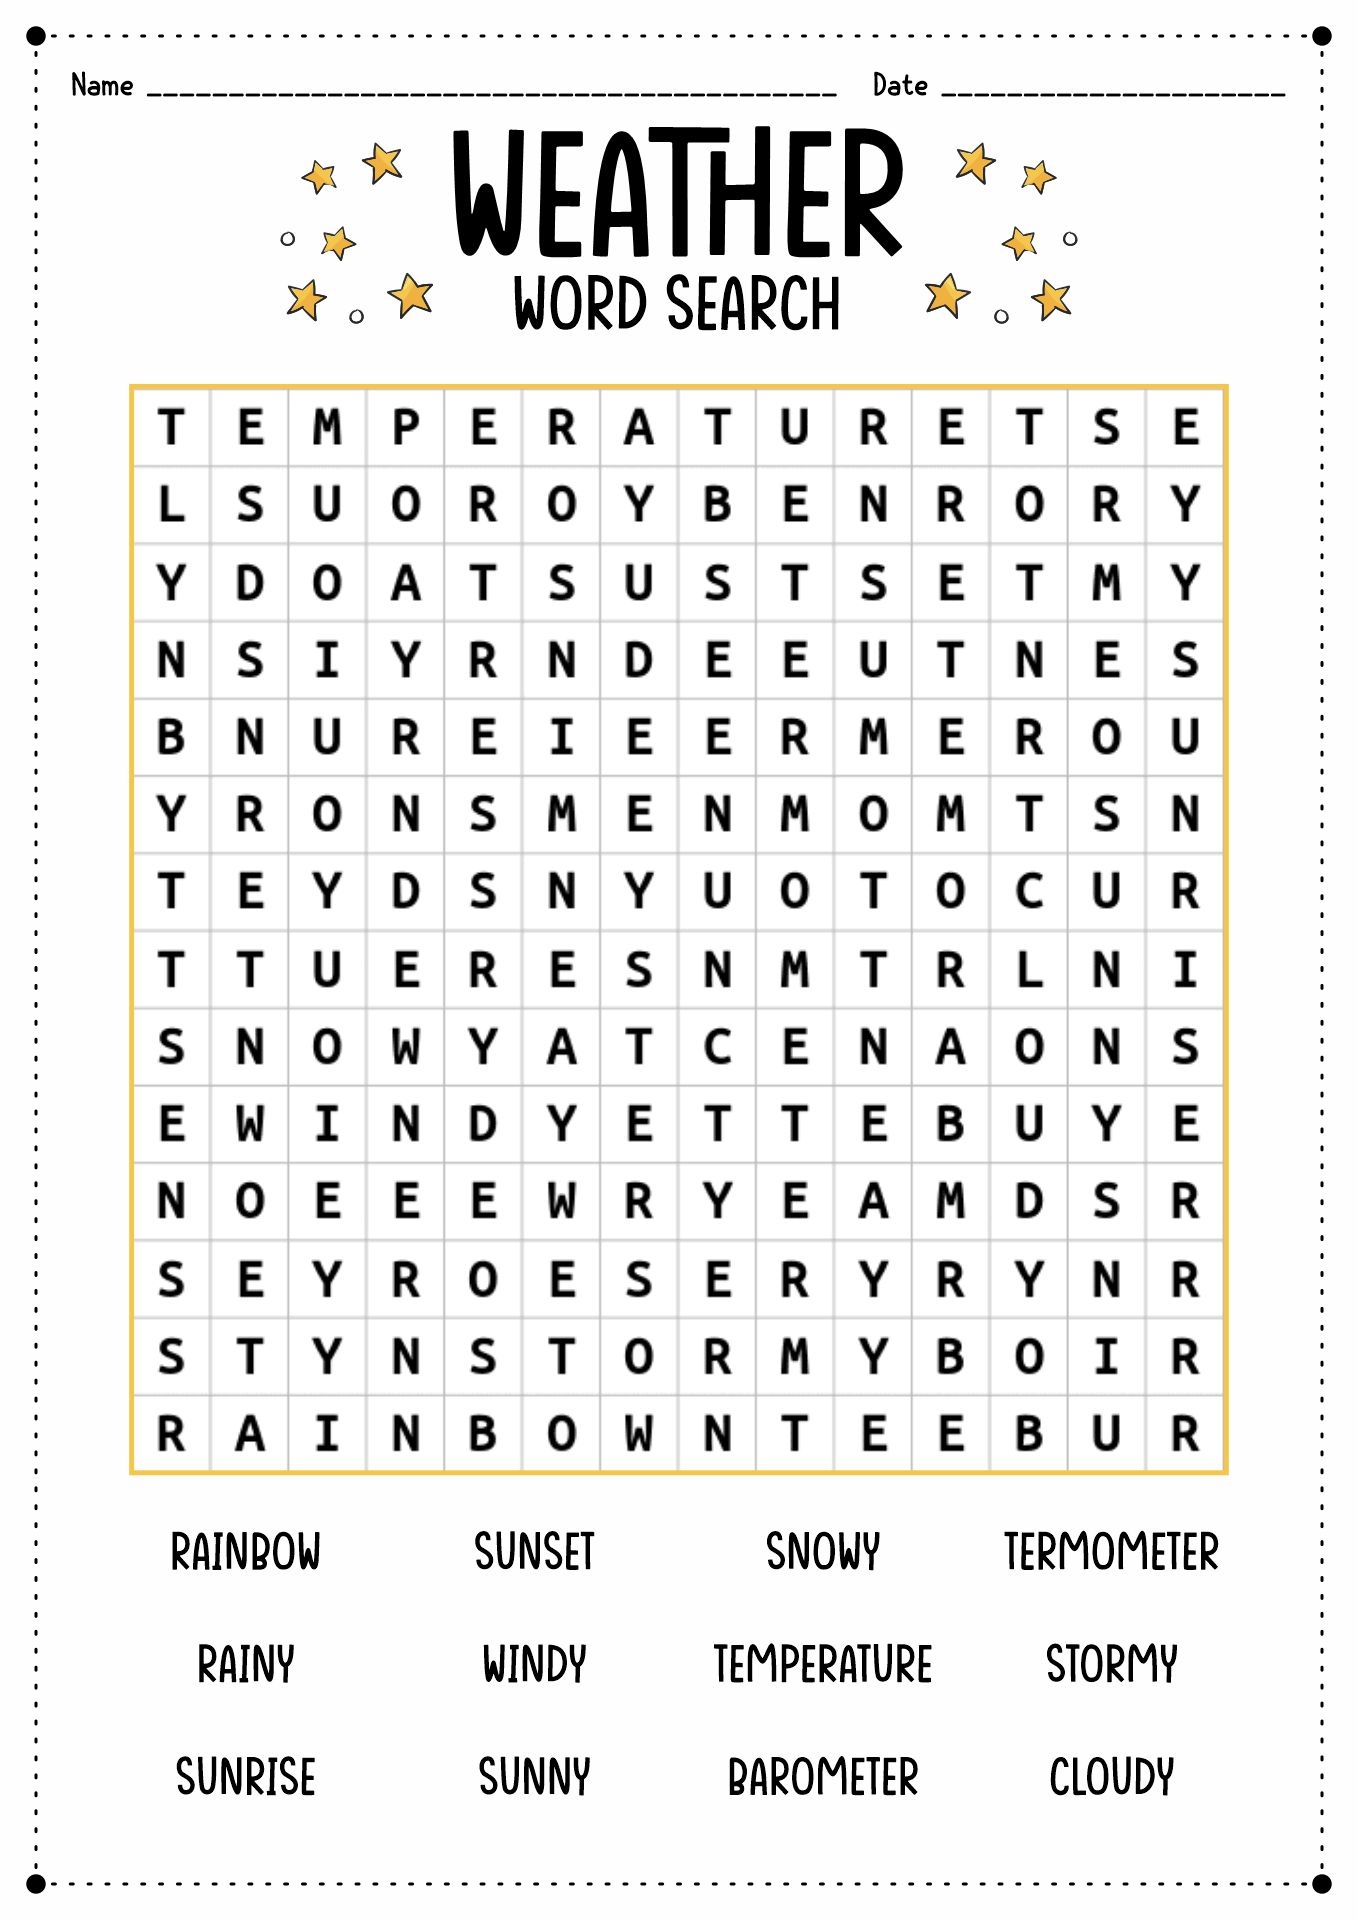 Weather Word Search Worksheet Image